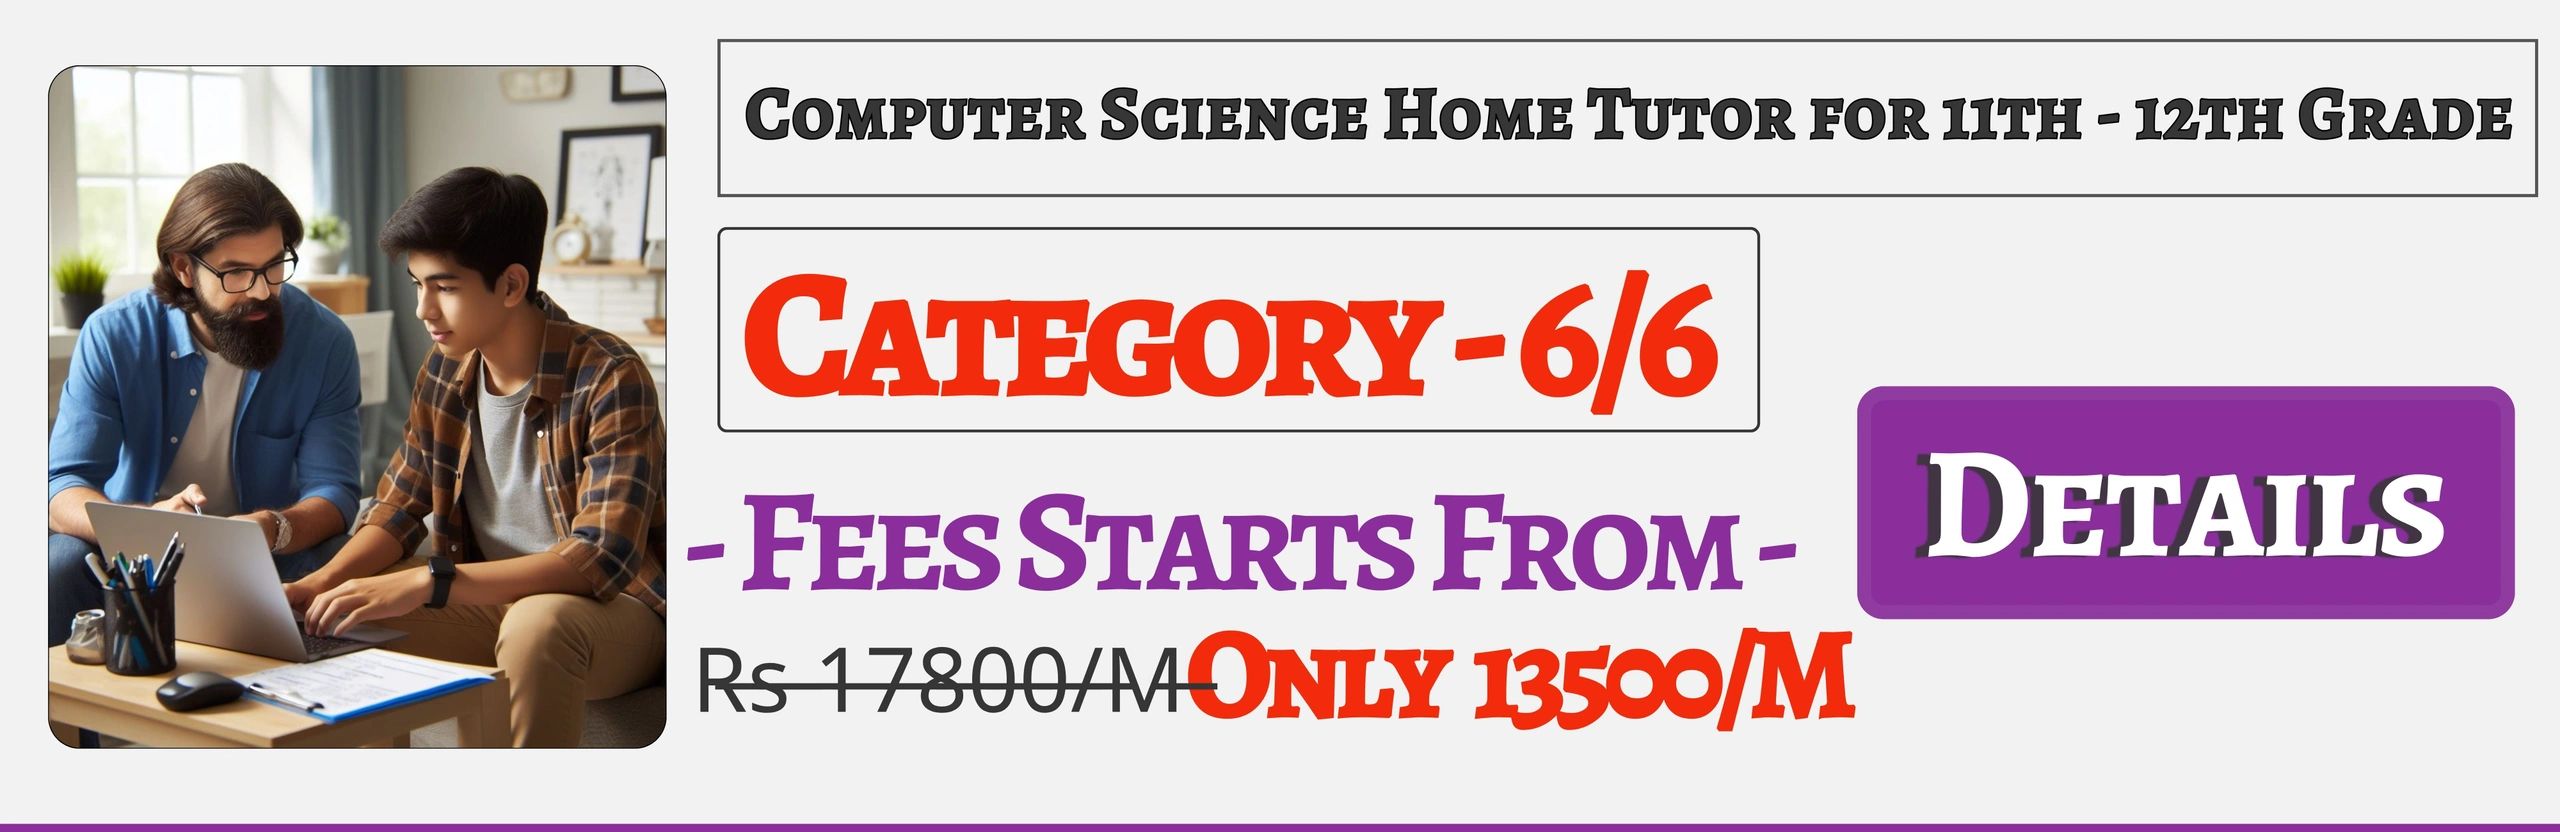 Book Best Nearby Computer Science Home Tuition Tutors For 11th & 12th In Jaipur , Fees Only 13500/M